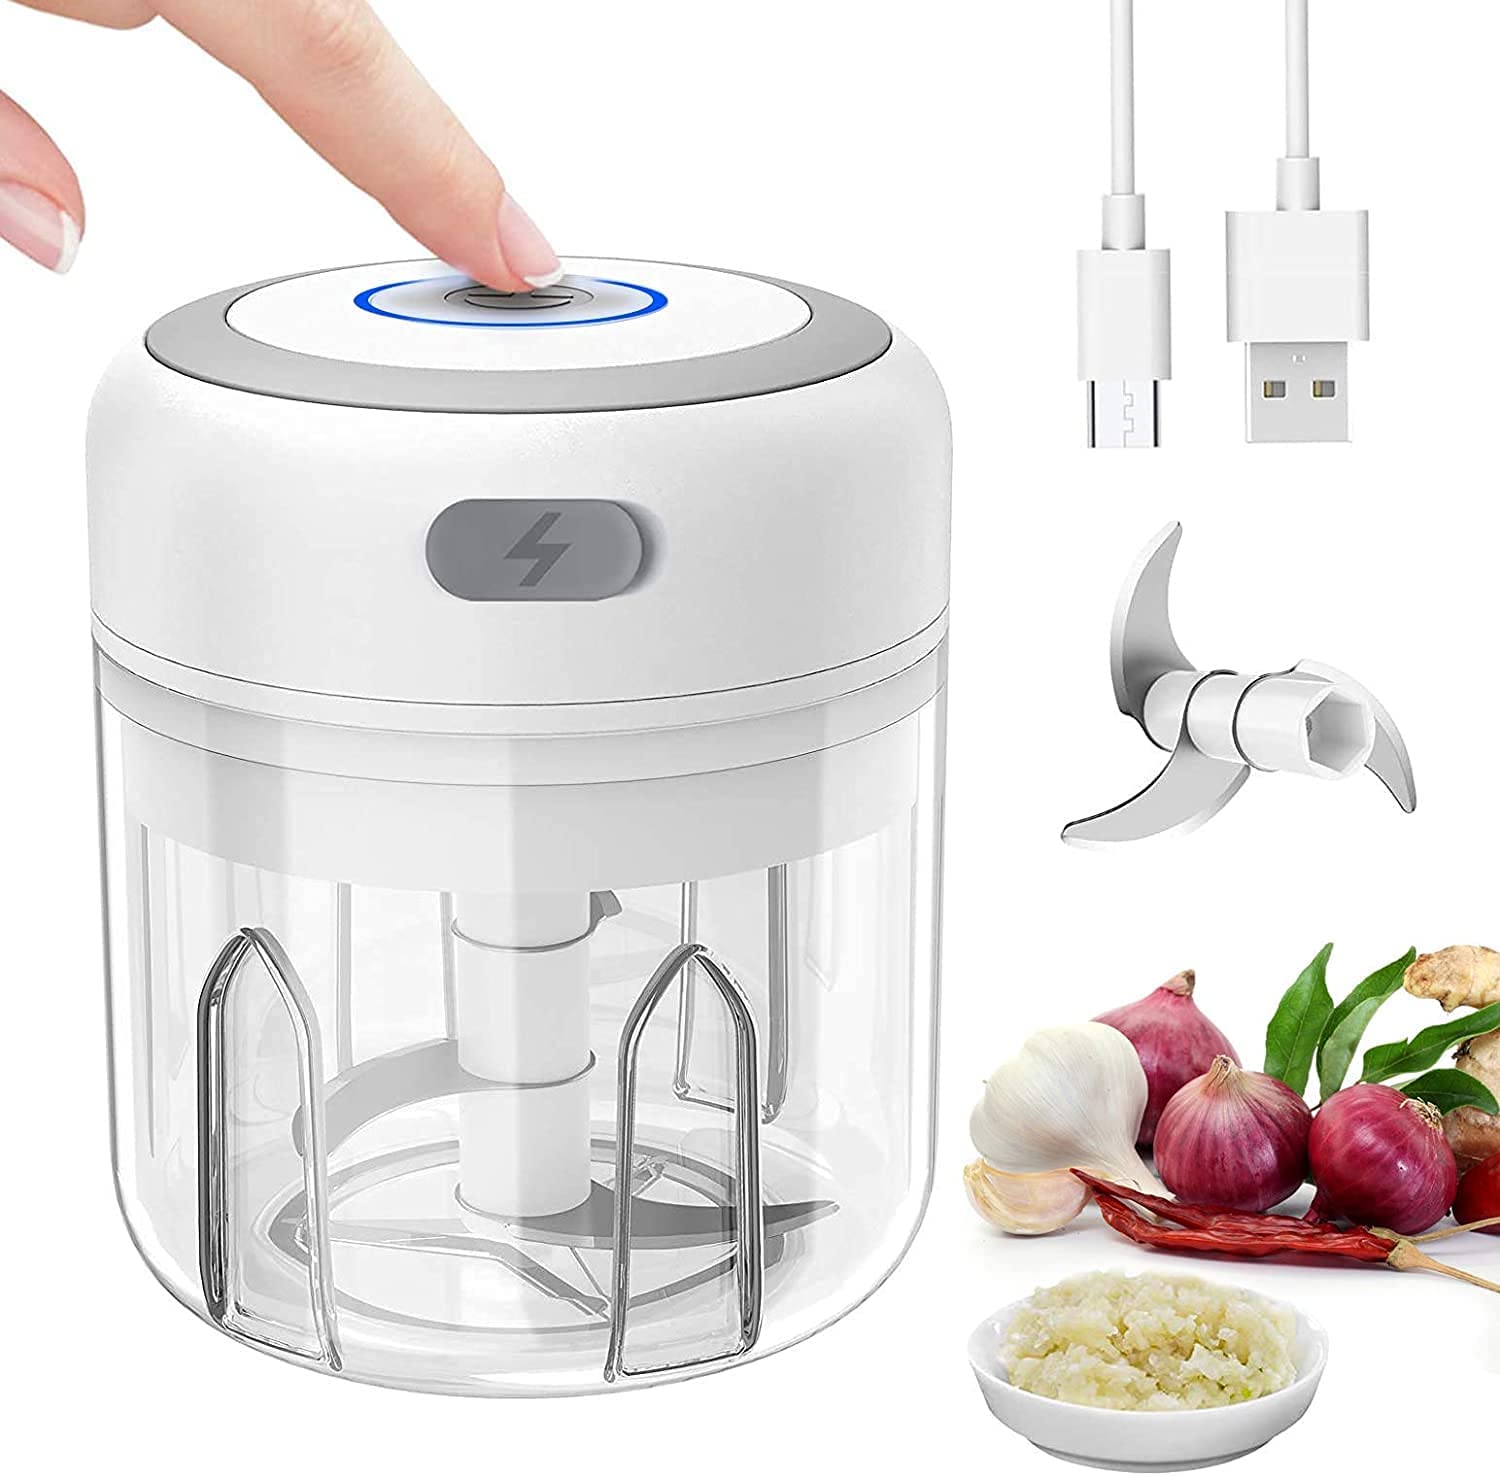 Love begans Kitchen Electric Chopper 250 ml Food Processor Mixer Onion Cutter with USB, Mini Multi Chopper Vegetable Chopper Garlic Chopper with 3 Sharp Blades for Garlic Vegetables Fruit